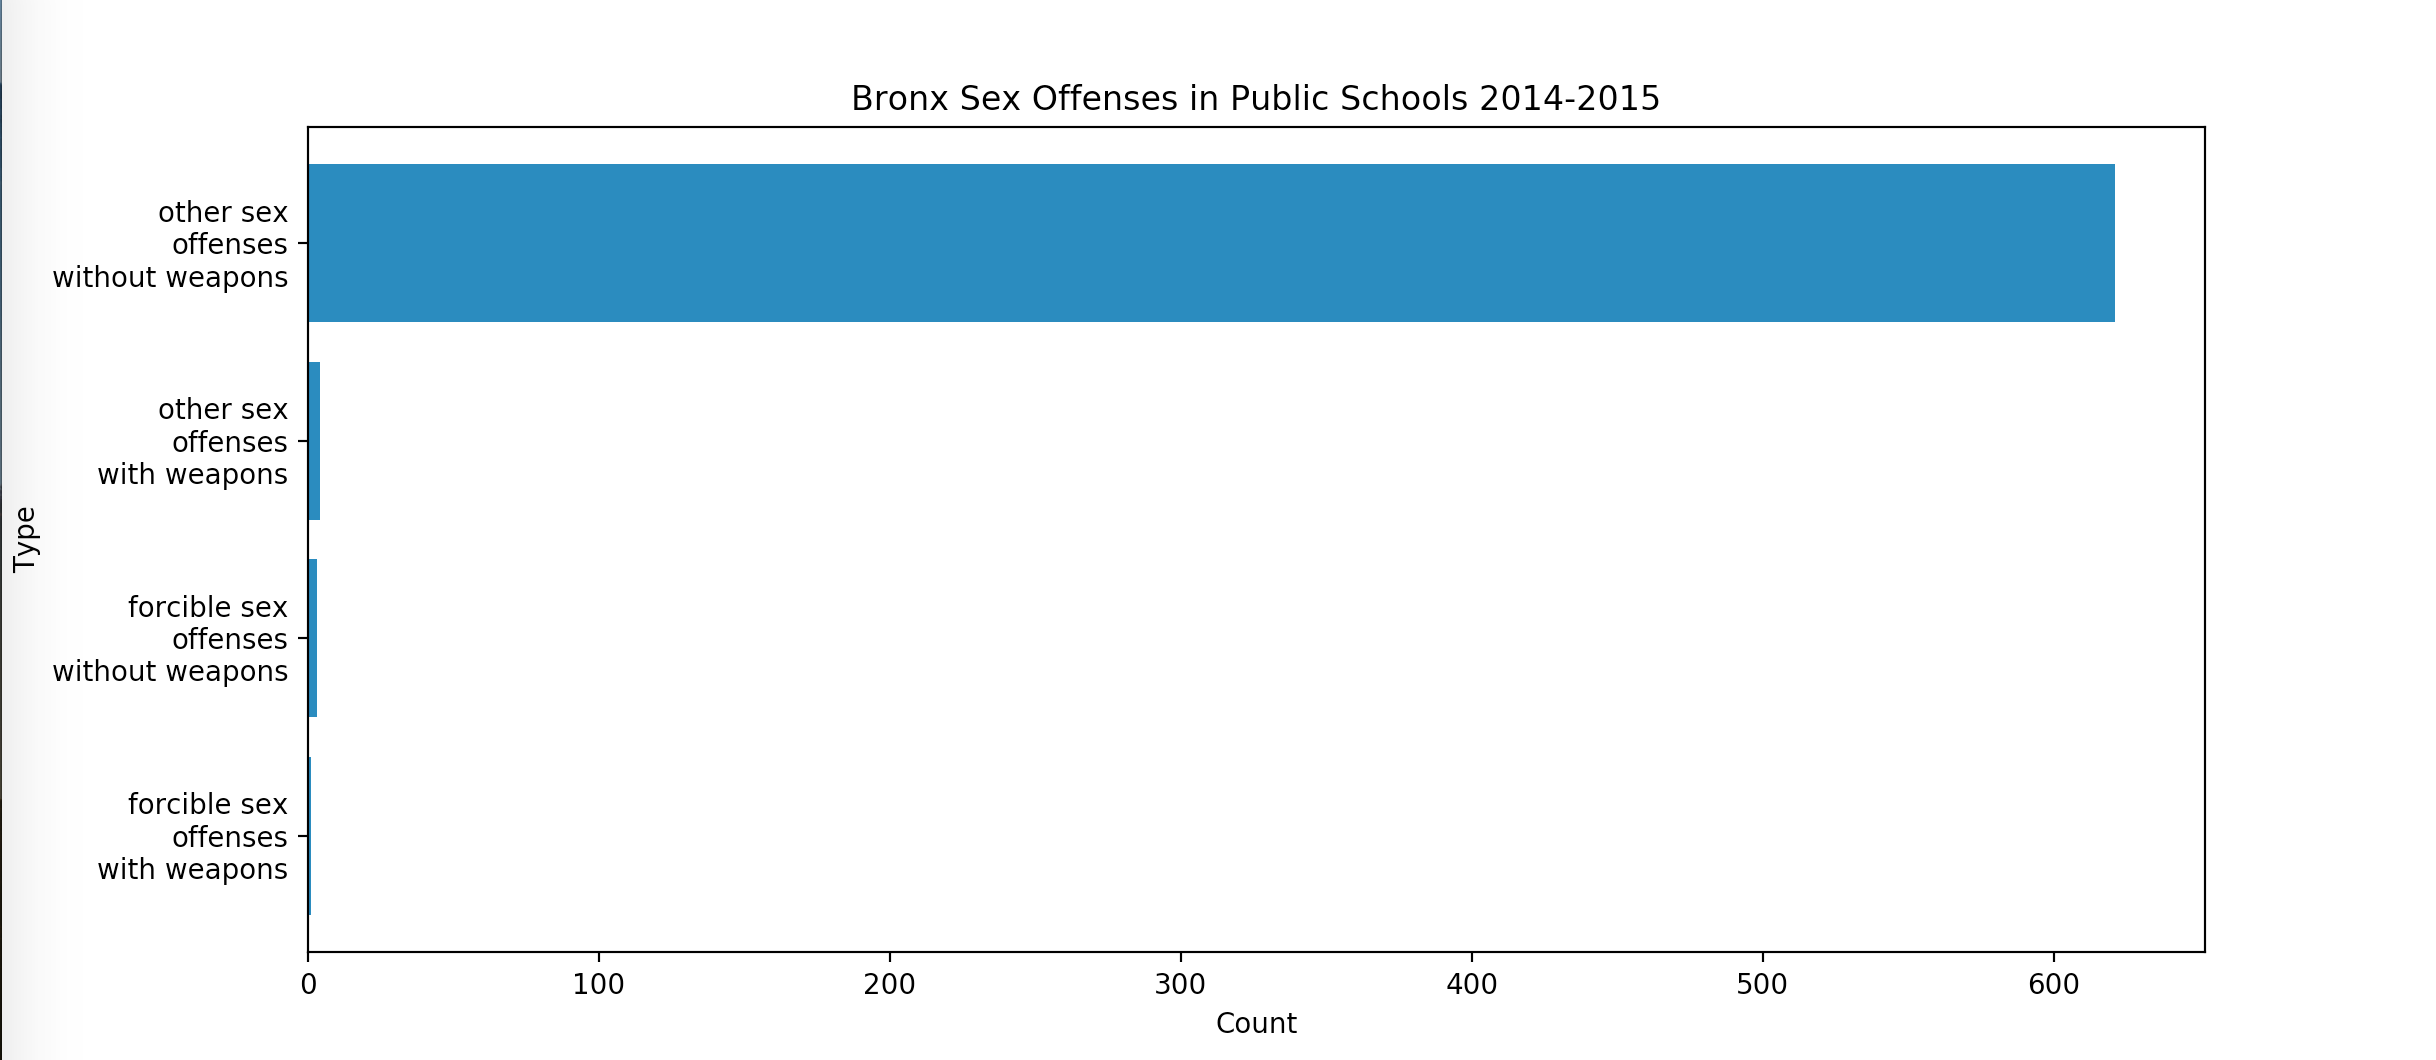 Bronx_sex_offenses_2014_2015.png